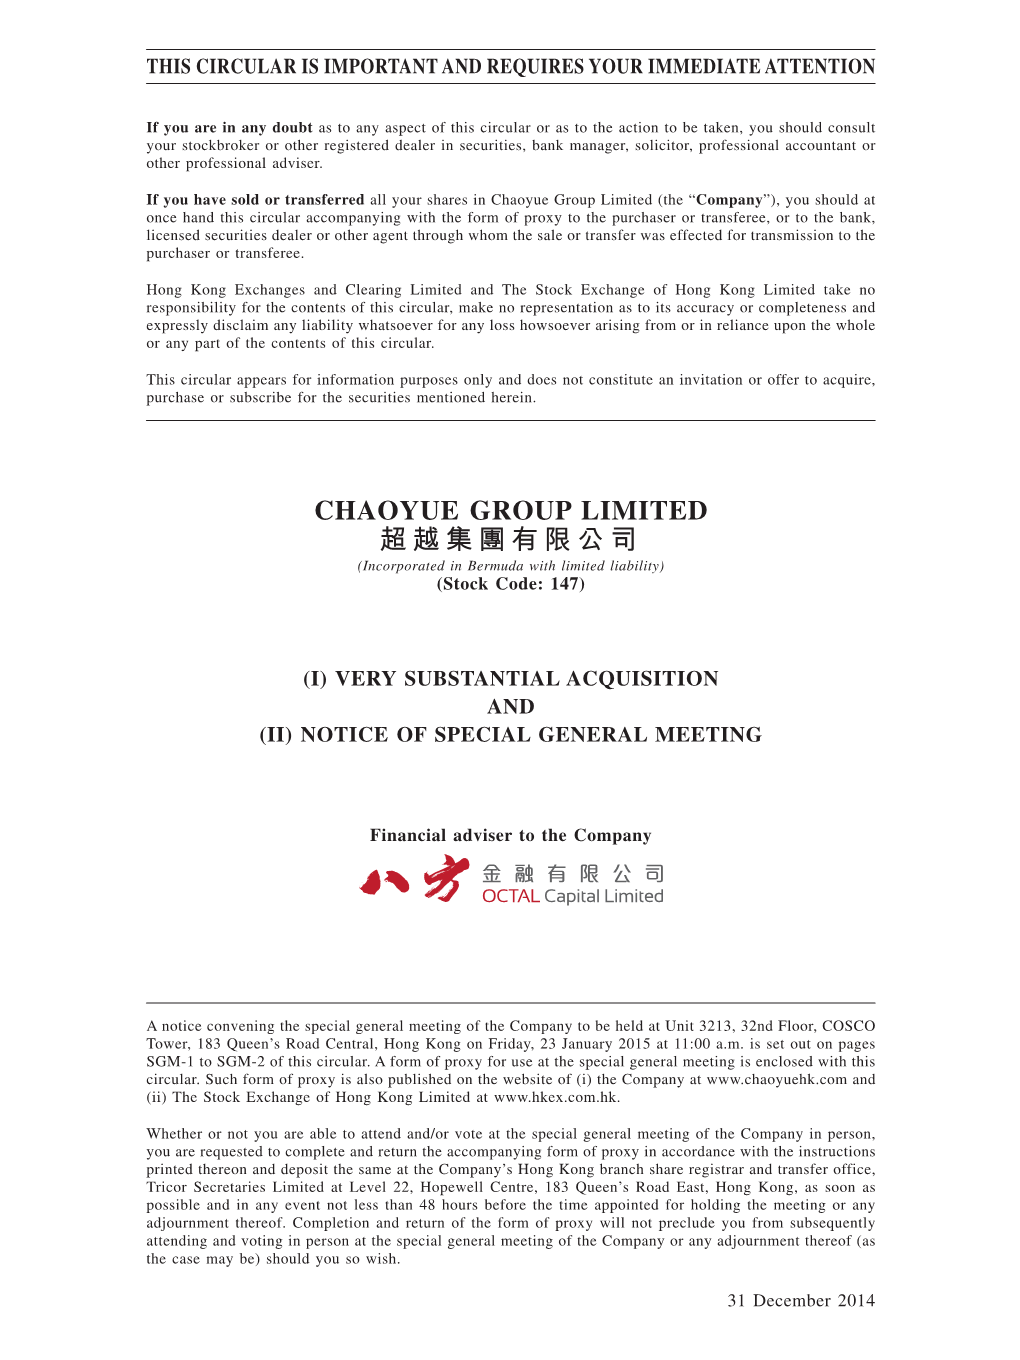 CHAOYUE GROUP LIMITED 超越集團有限公司 (Incorporated in Bermuda with Limited Liability) (Stock Code: 147)